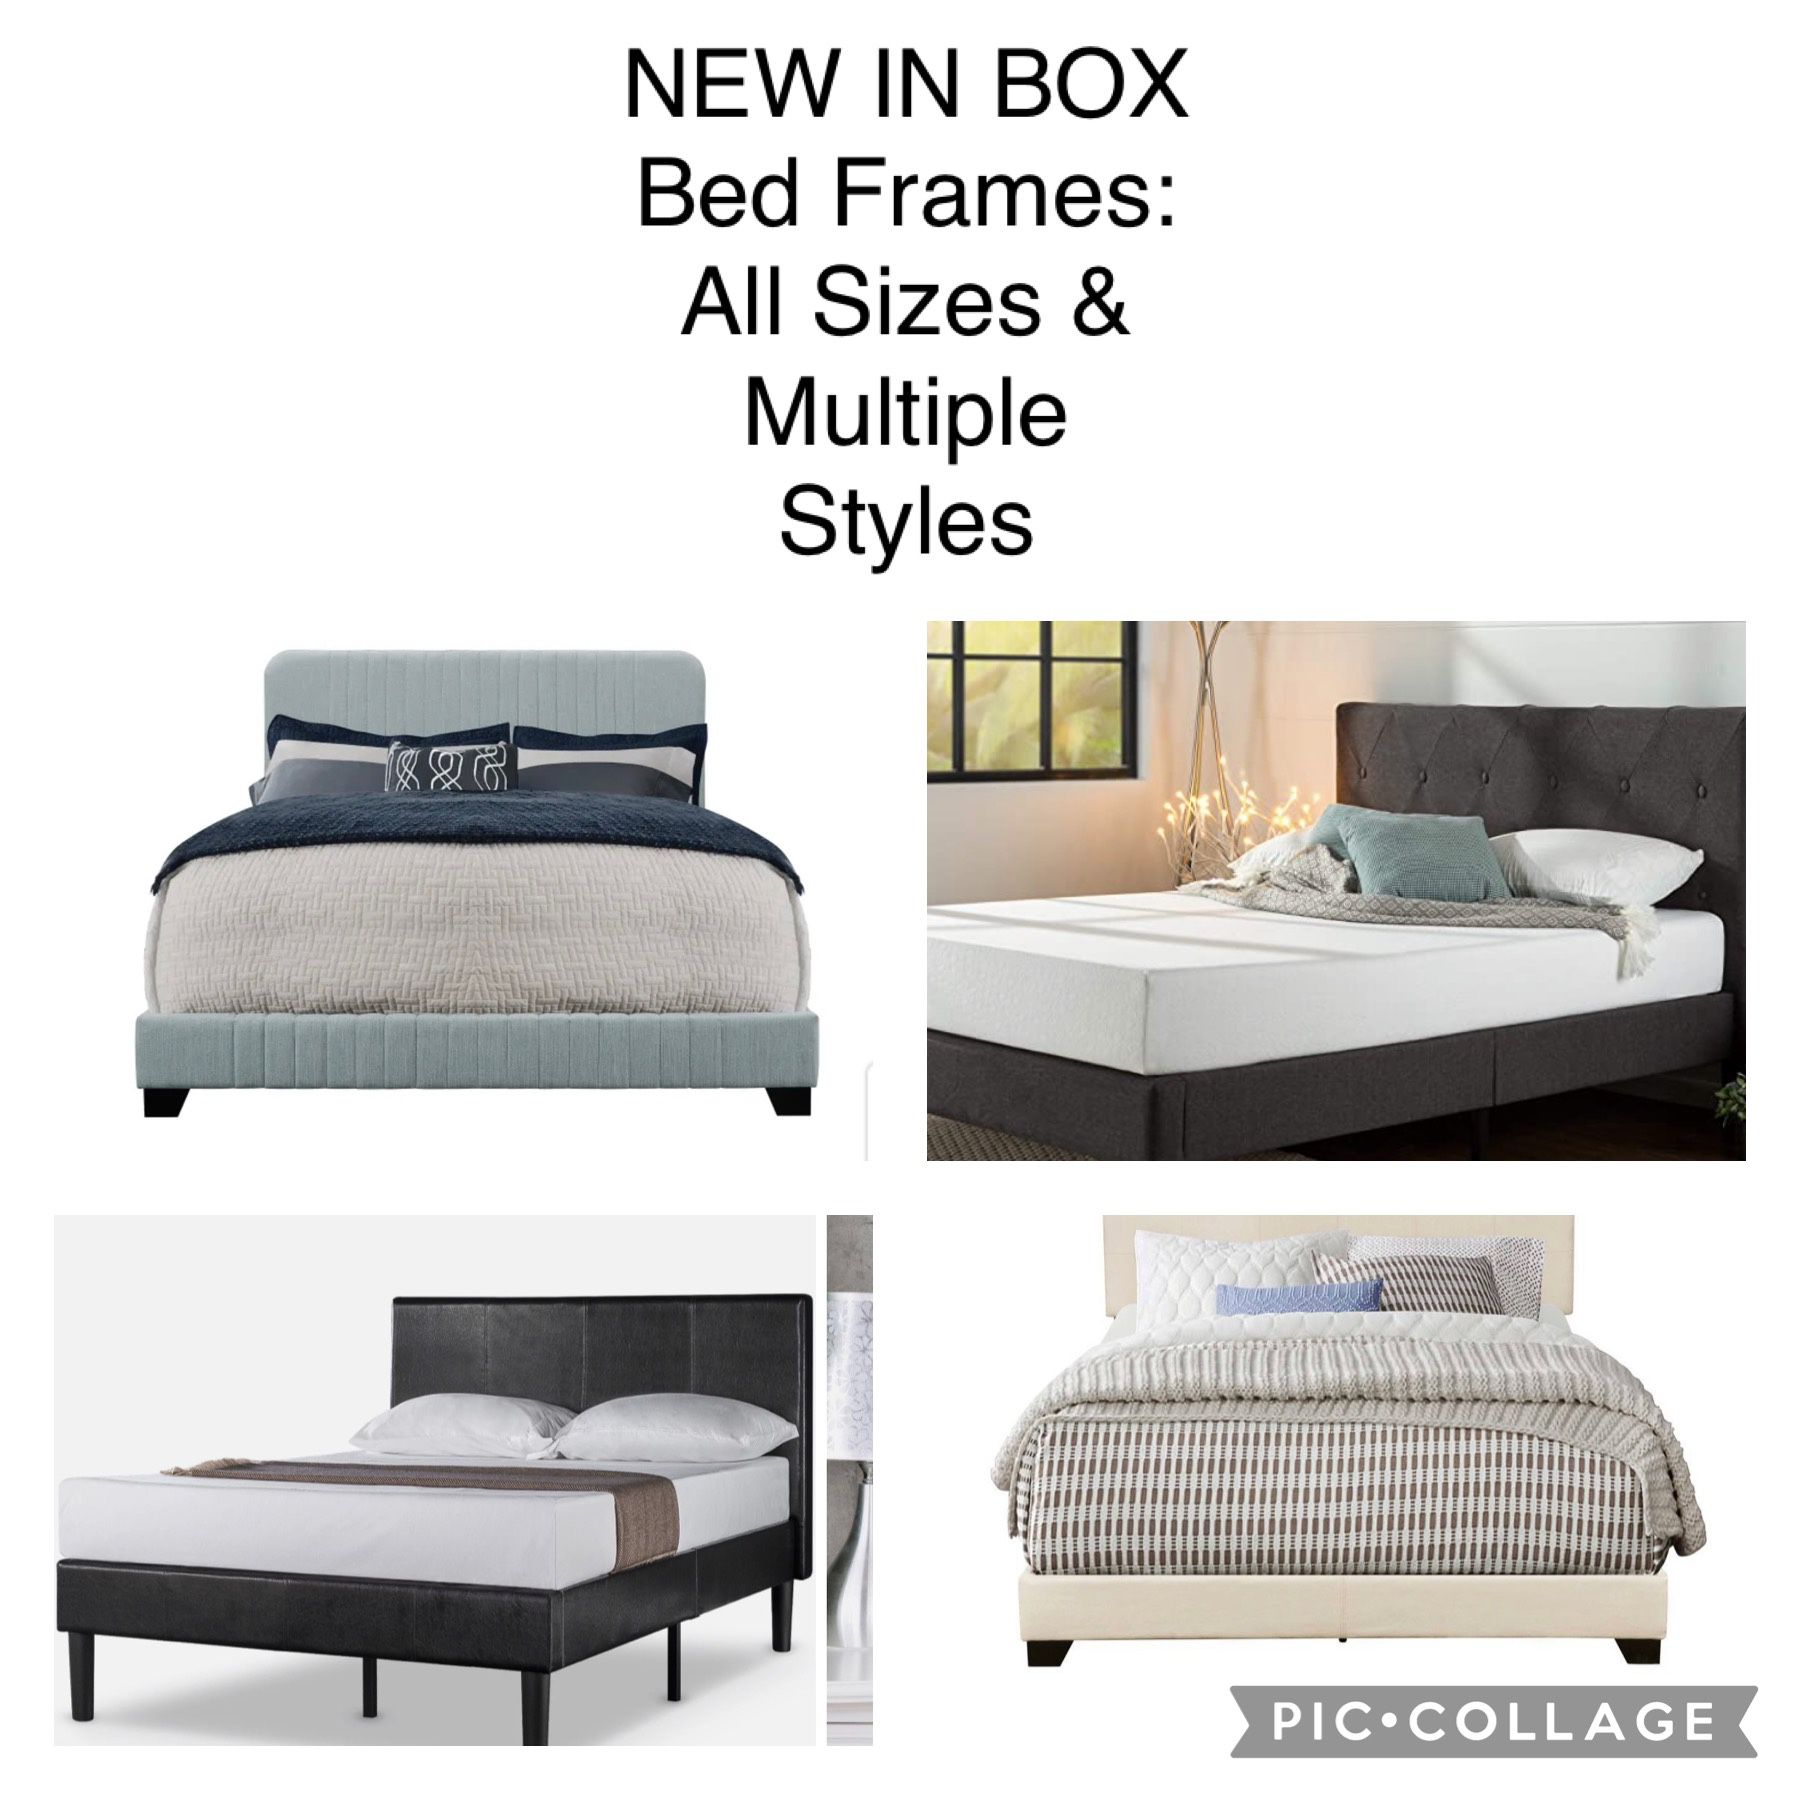 NEW IN BOX BED FRAMES & PLATFORM BED FRAMES at discounted prices Multiple sizes and styles available, message me with the size you're looking for! Twi